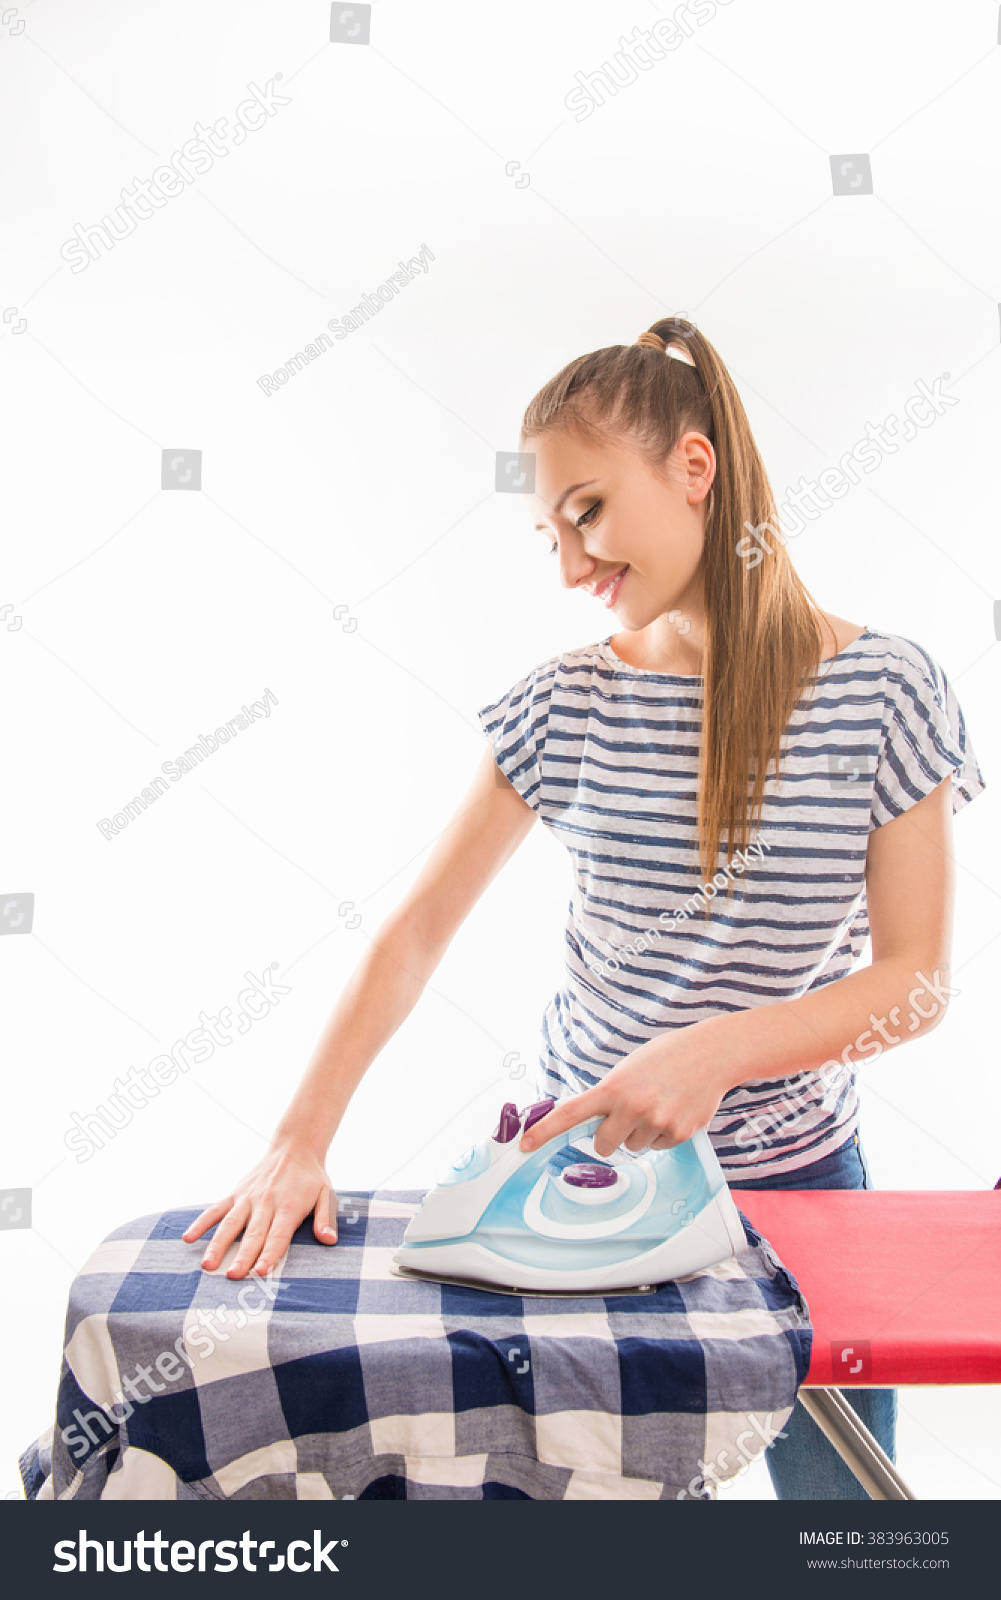 Her On The Ironing Board 44